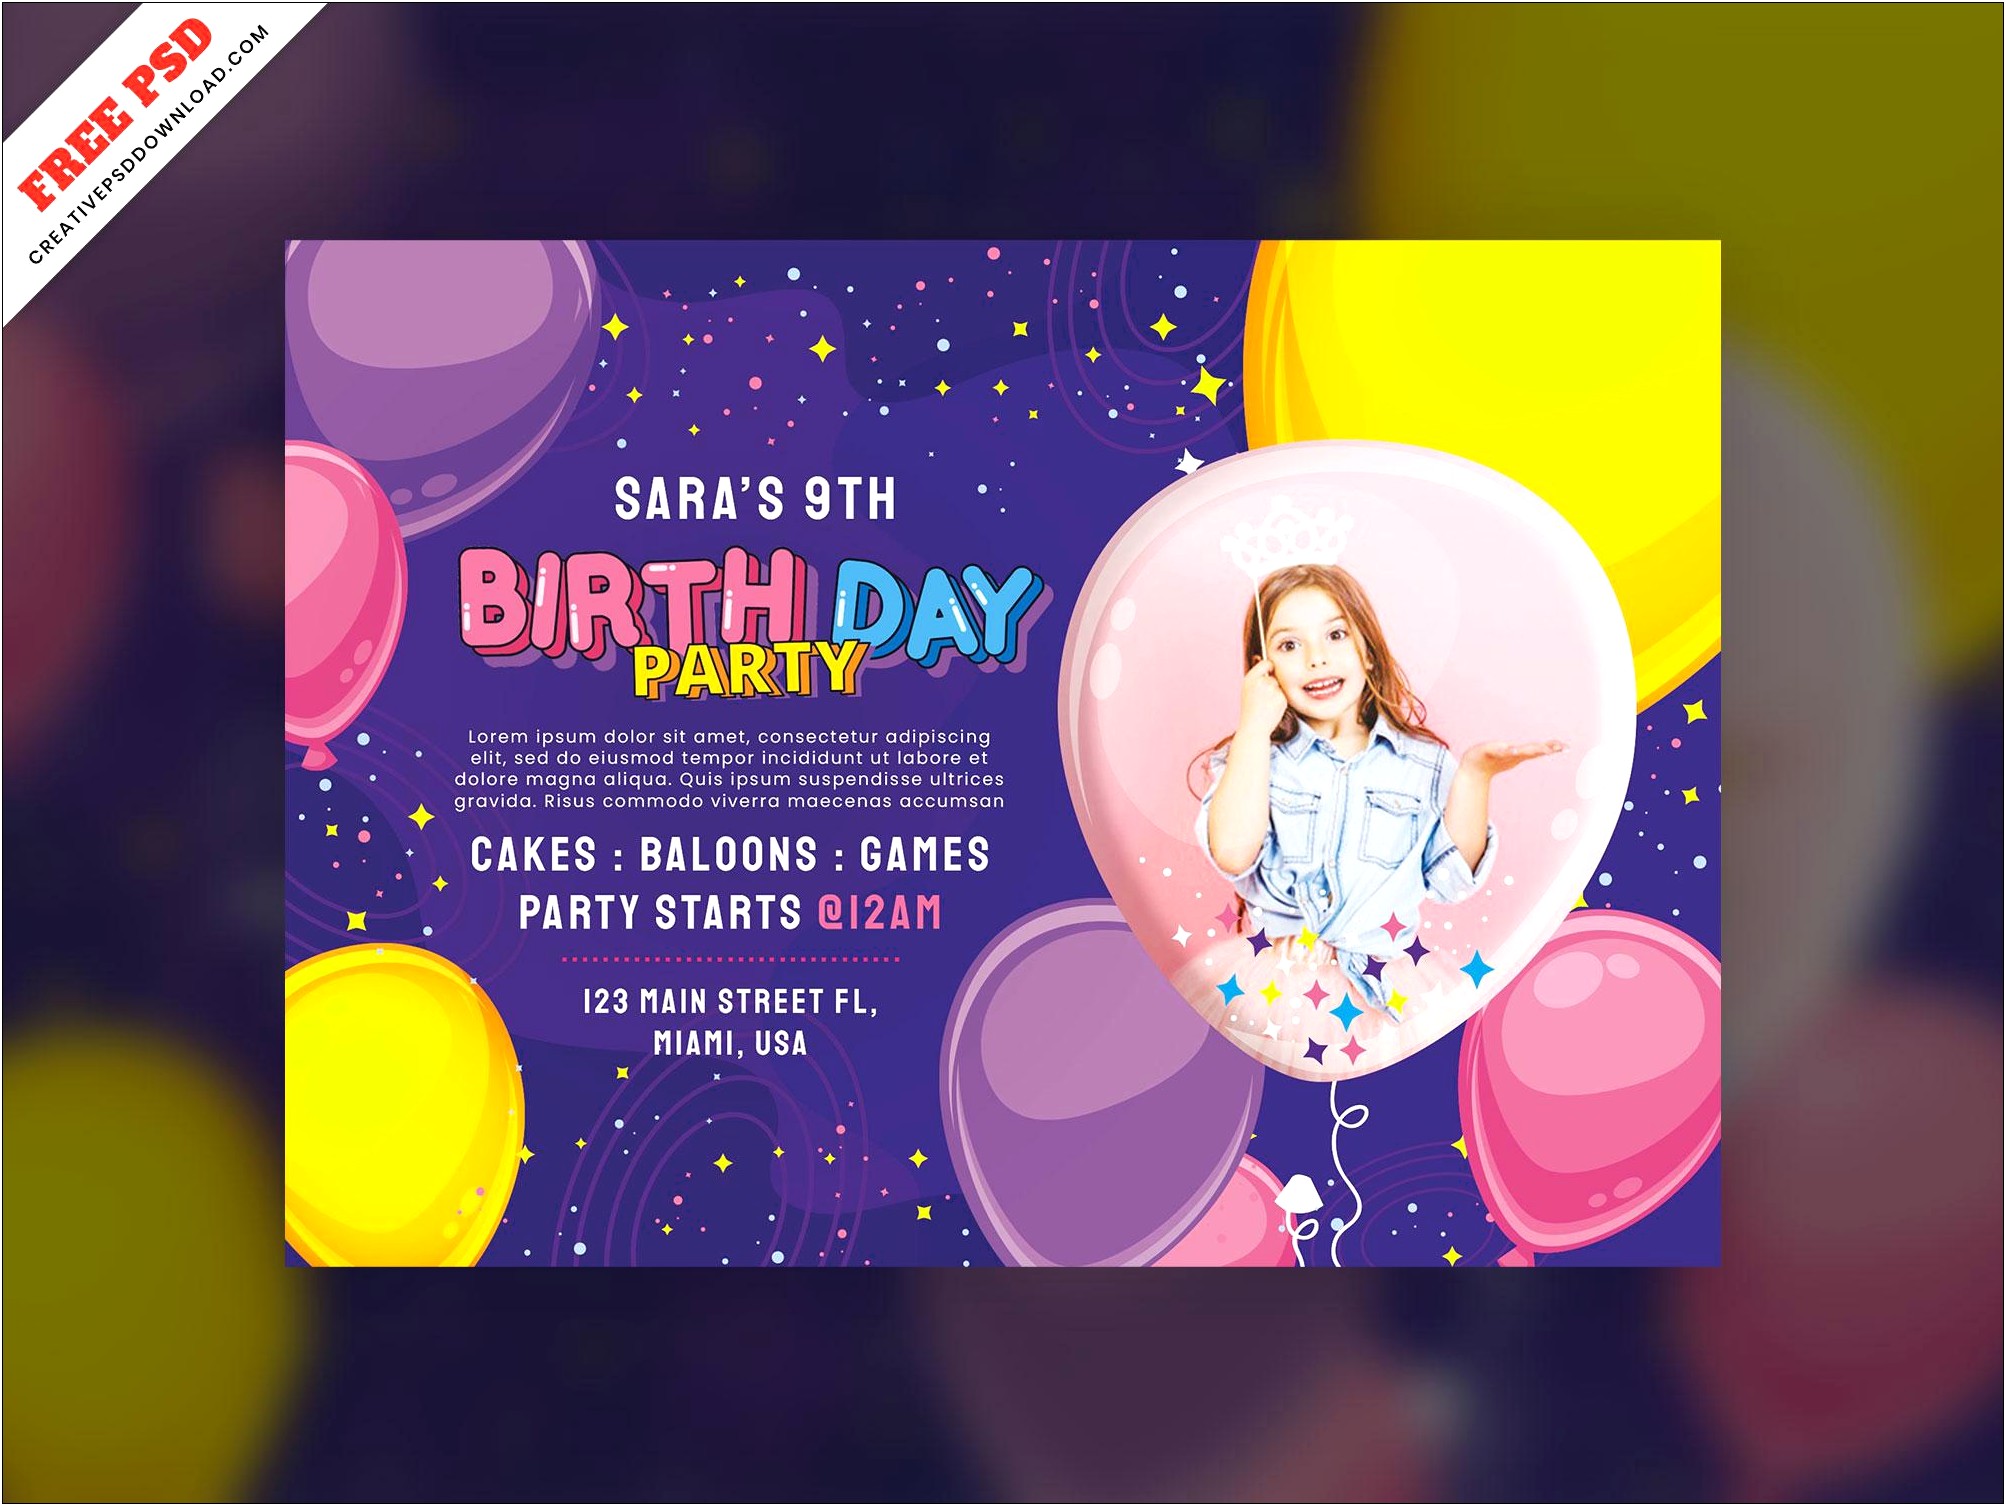 Birthday Greetings Psd Templates Free Download